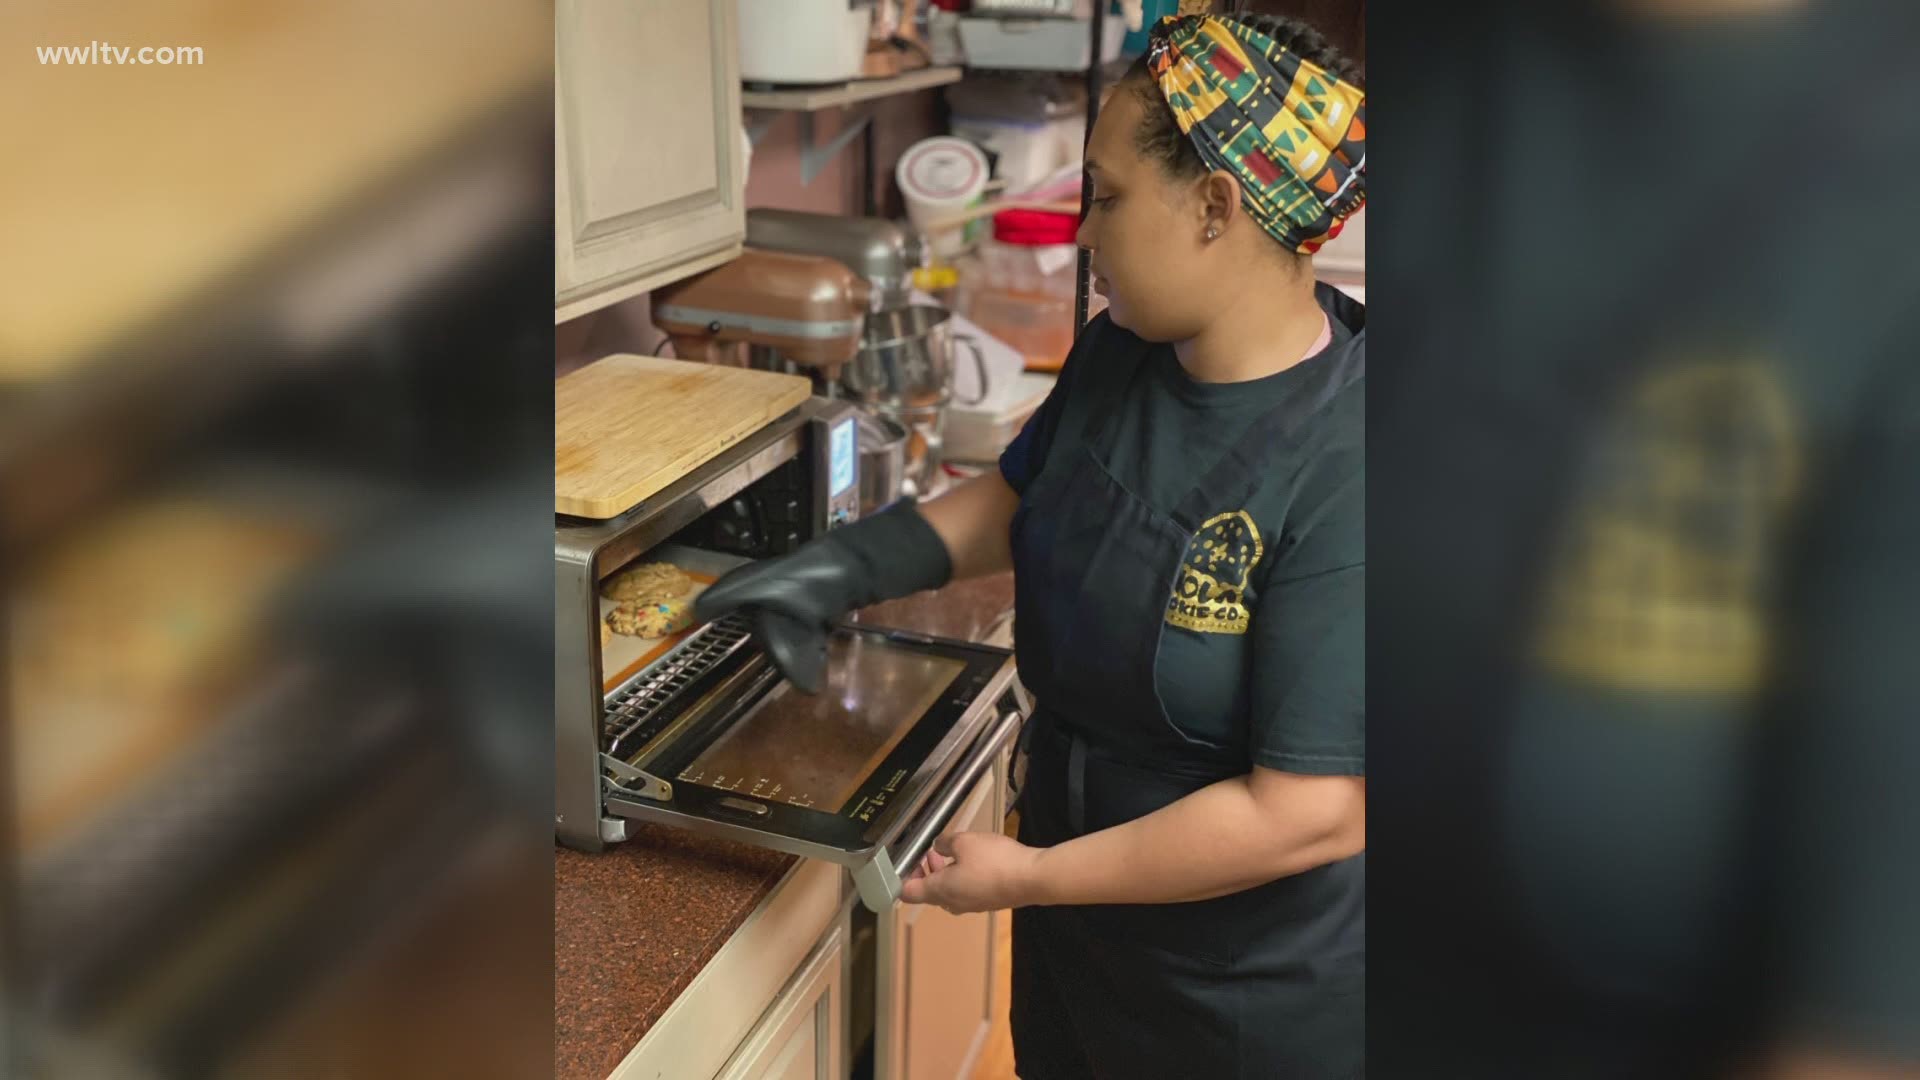 Brittney Hawkins-Dobard, owner of NOLA Cookie Co., who Sheba Turk has dubbed the "Cookie Queen," joins the WWL-TV Morning Show to talk about how her business started